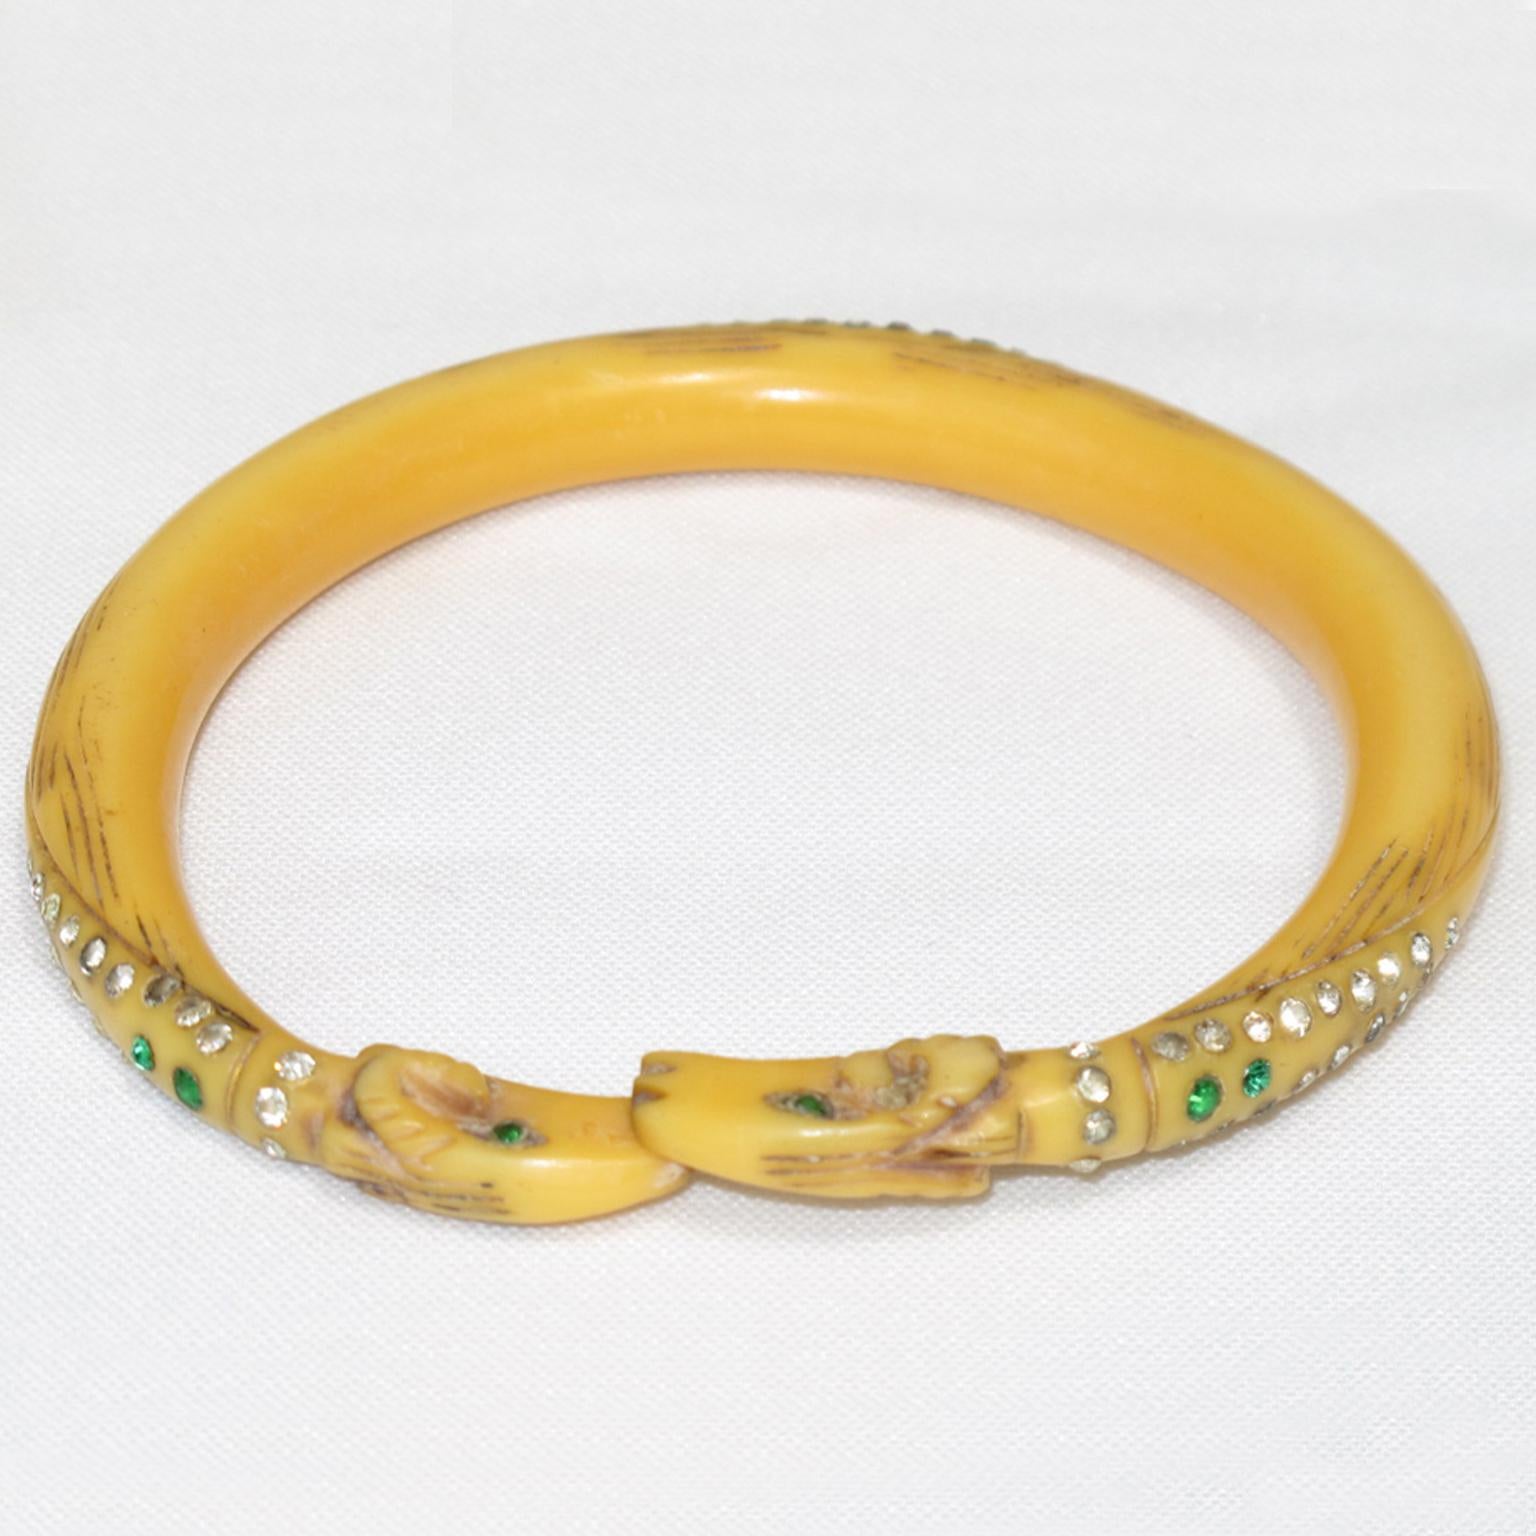 This is a rare and lovely Art Nouveau Celluloid bracelet bangle made in France in the 1910s. The piece features a hand-carved double ram heads design, complimented with crystal rhinestones adornment around the bracelet. The bracelet has a nice